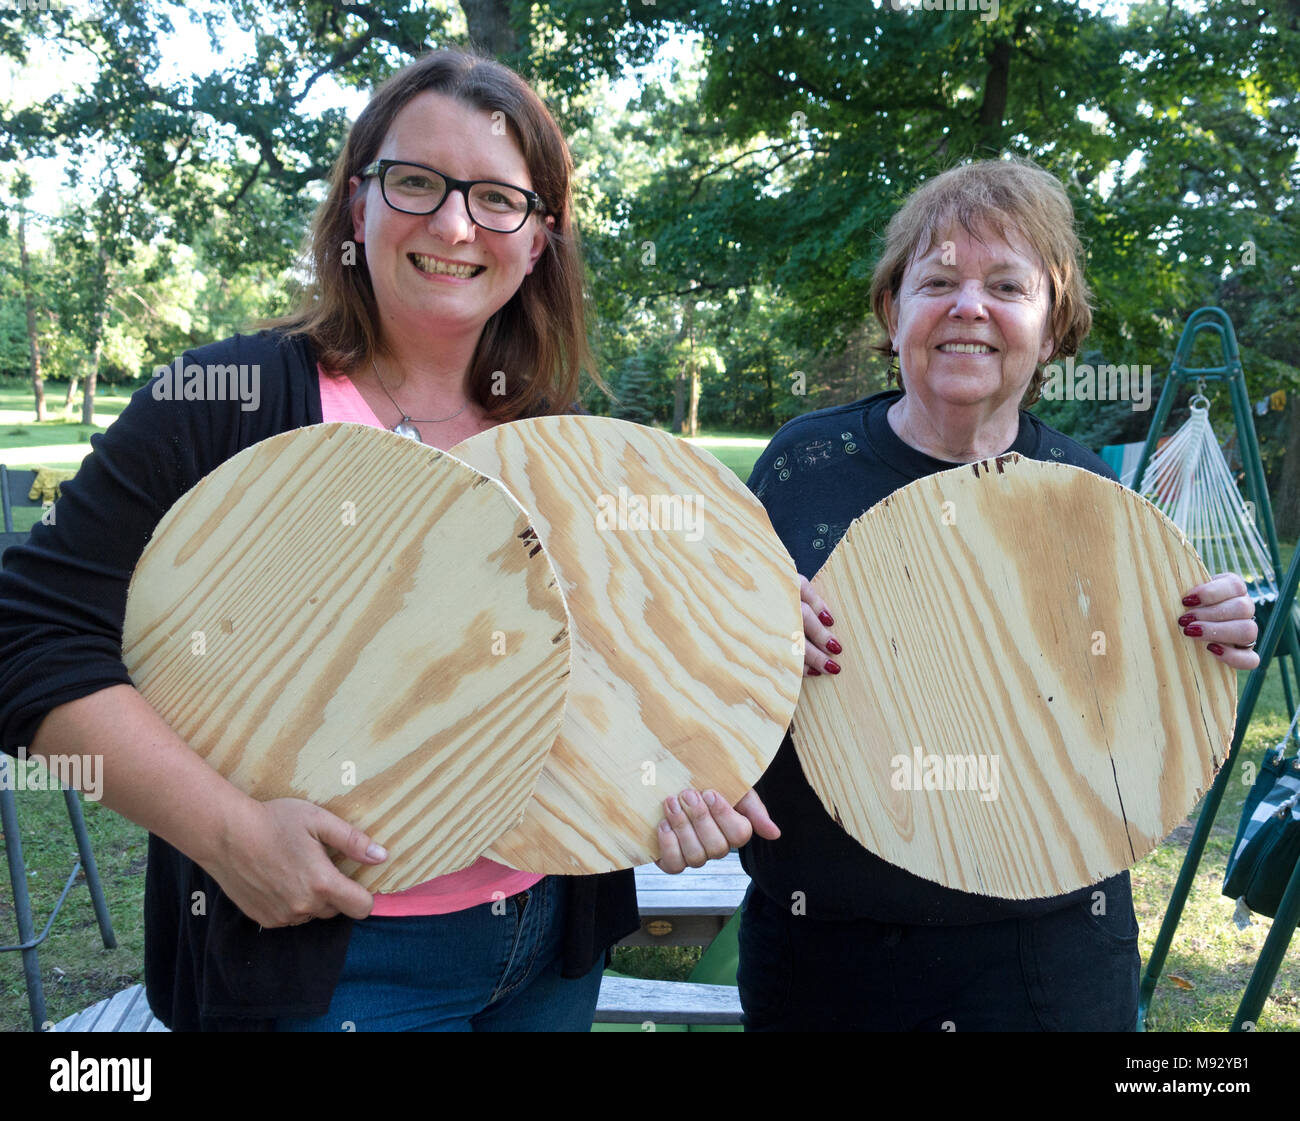 Two proud women holding up circle cut-outs they just made from a sheet of plywood for remodeling barstool seats. Clitherall Minnesota MN USA Stock Photo